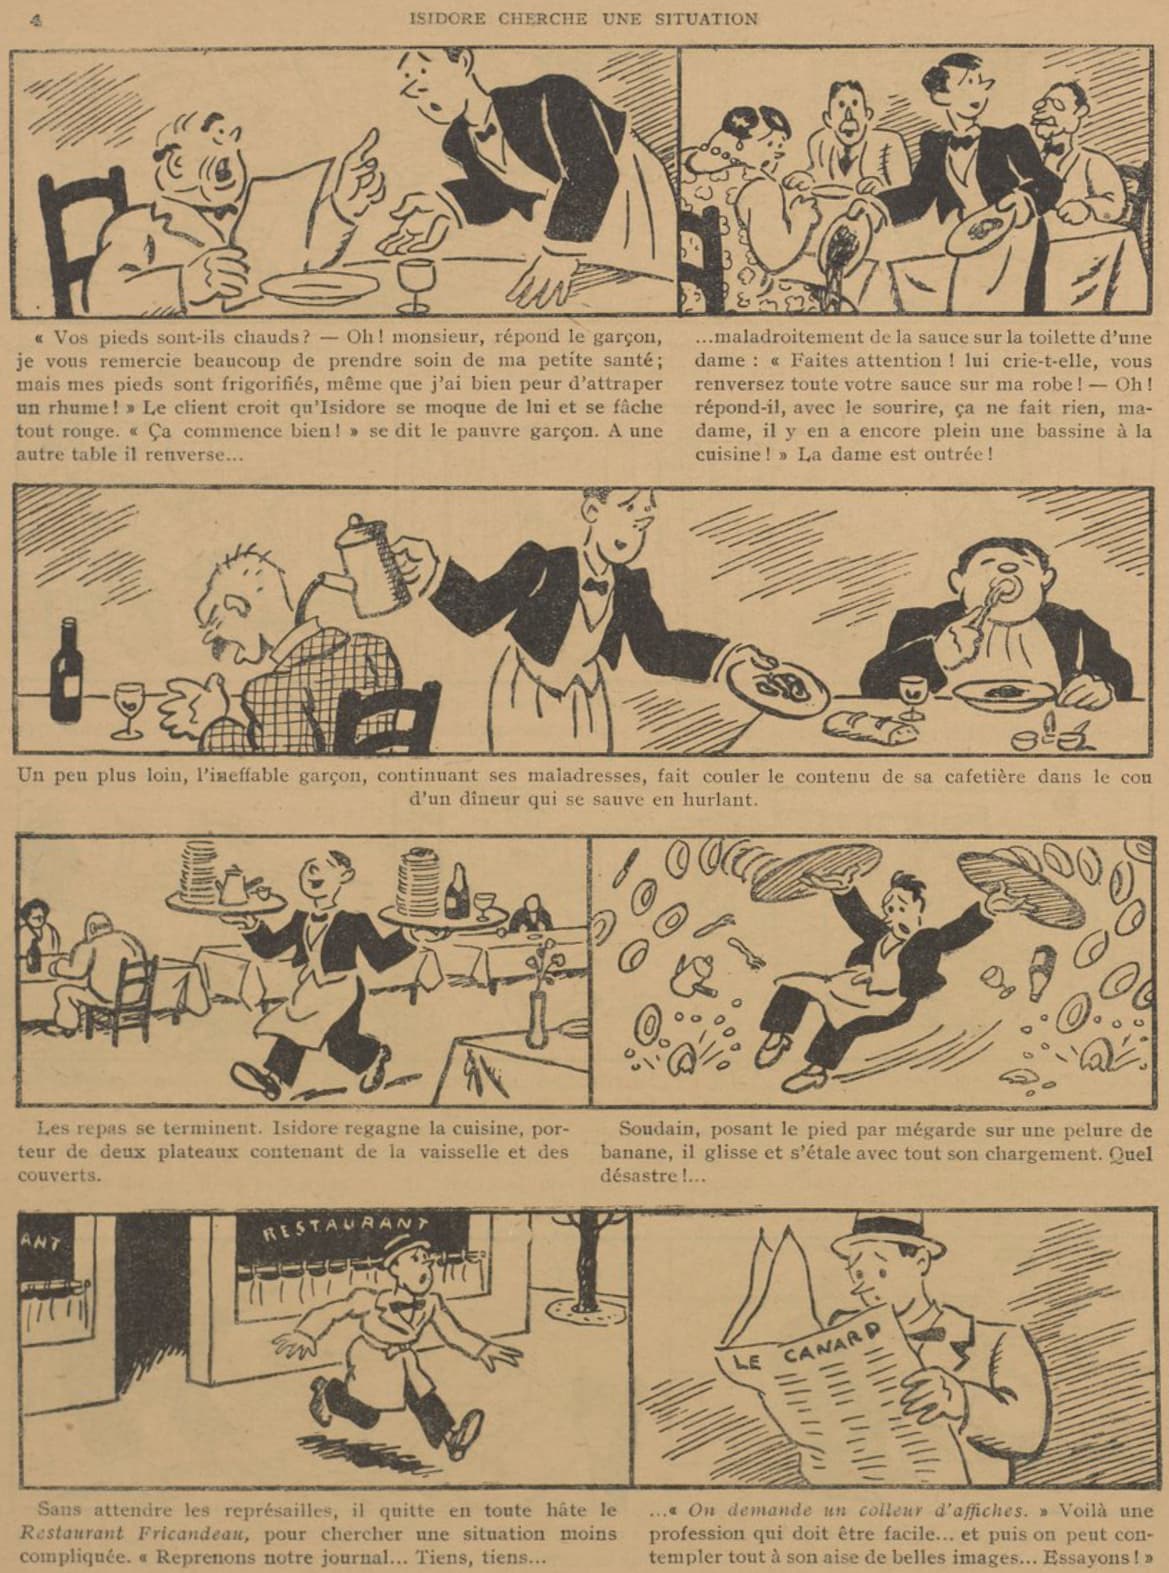 Guignol 1932 - n°190 - Isidore cherche une situation - 3 avril 1932 - page 4